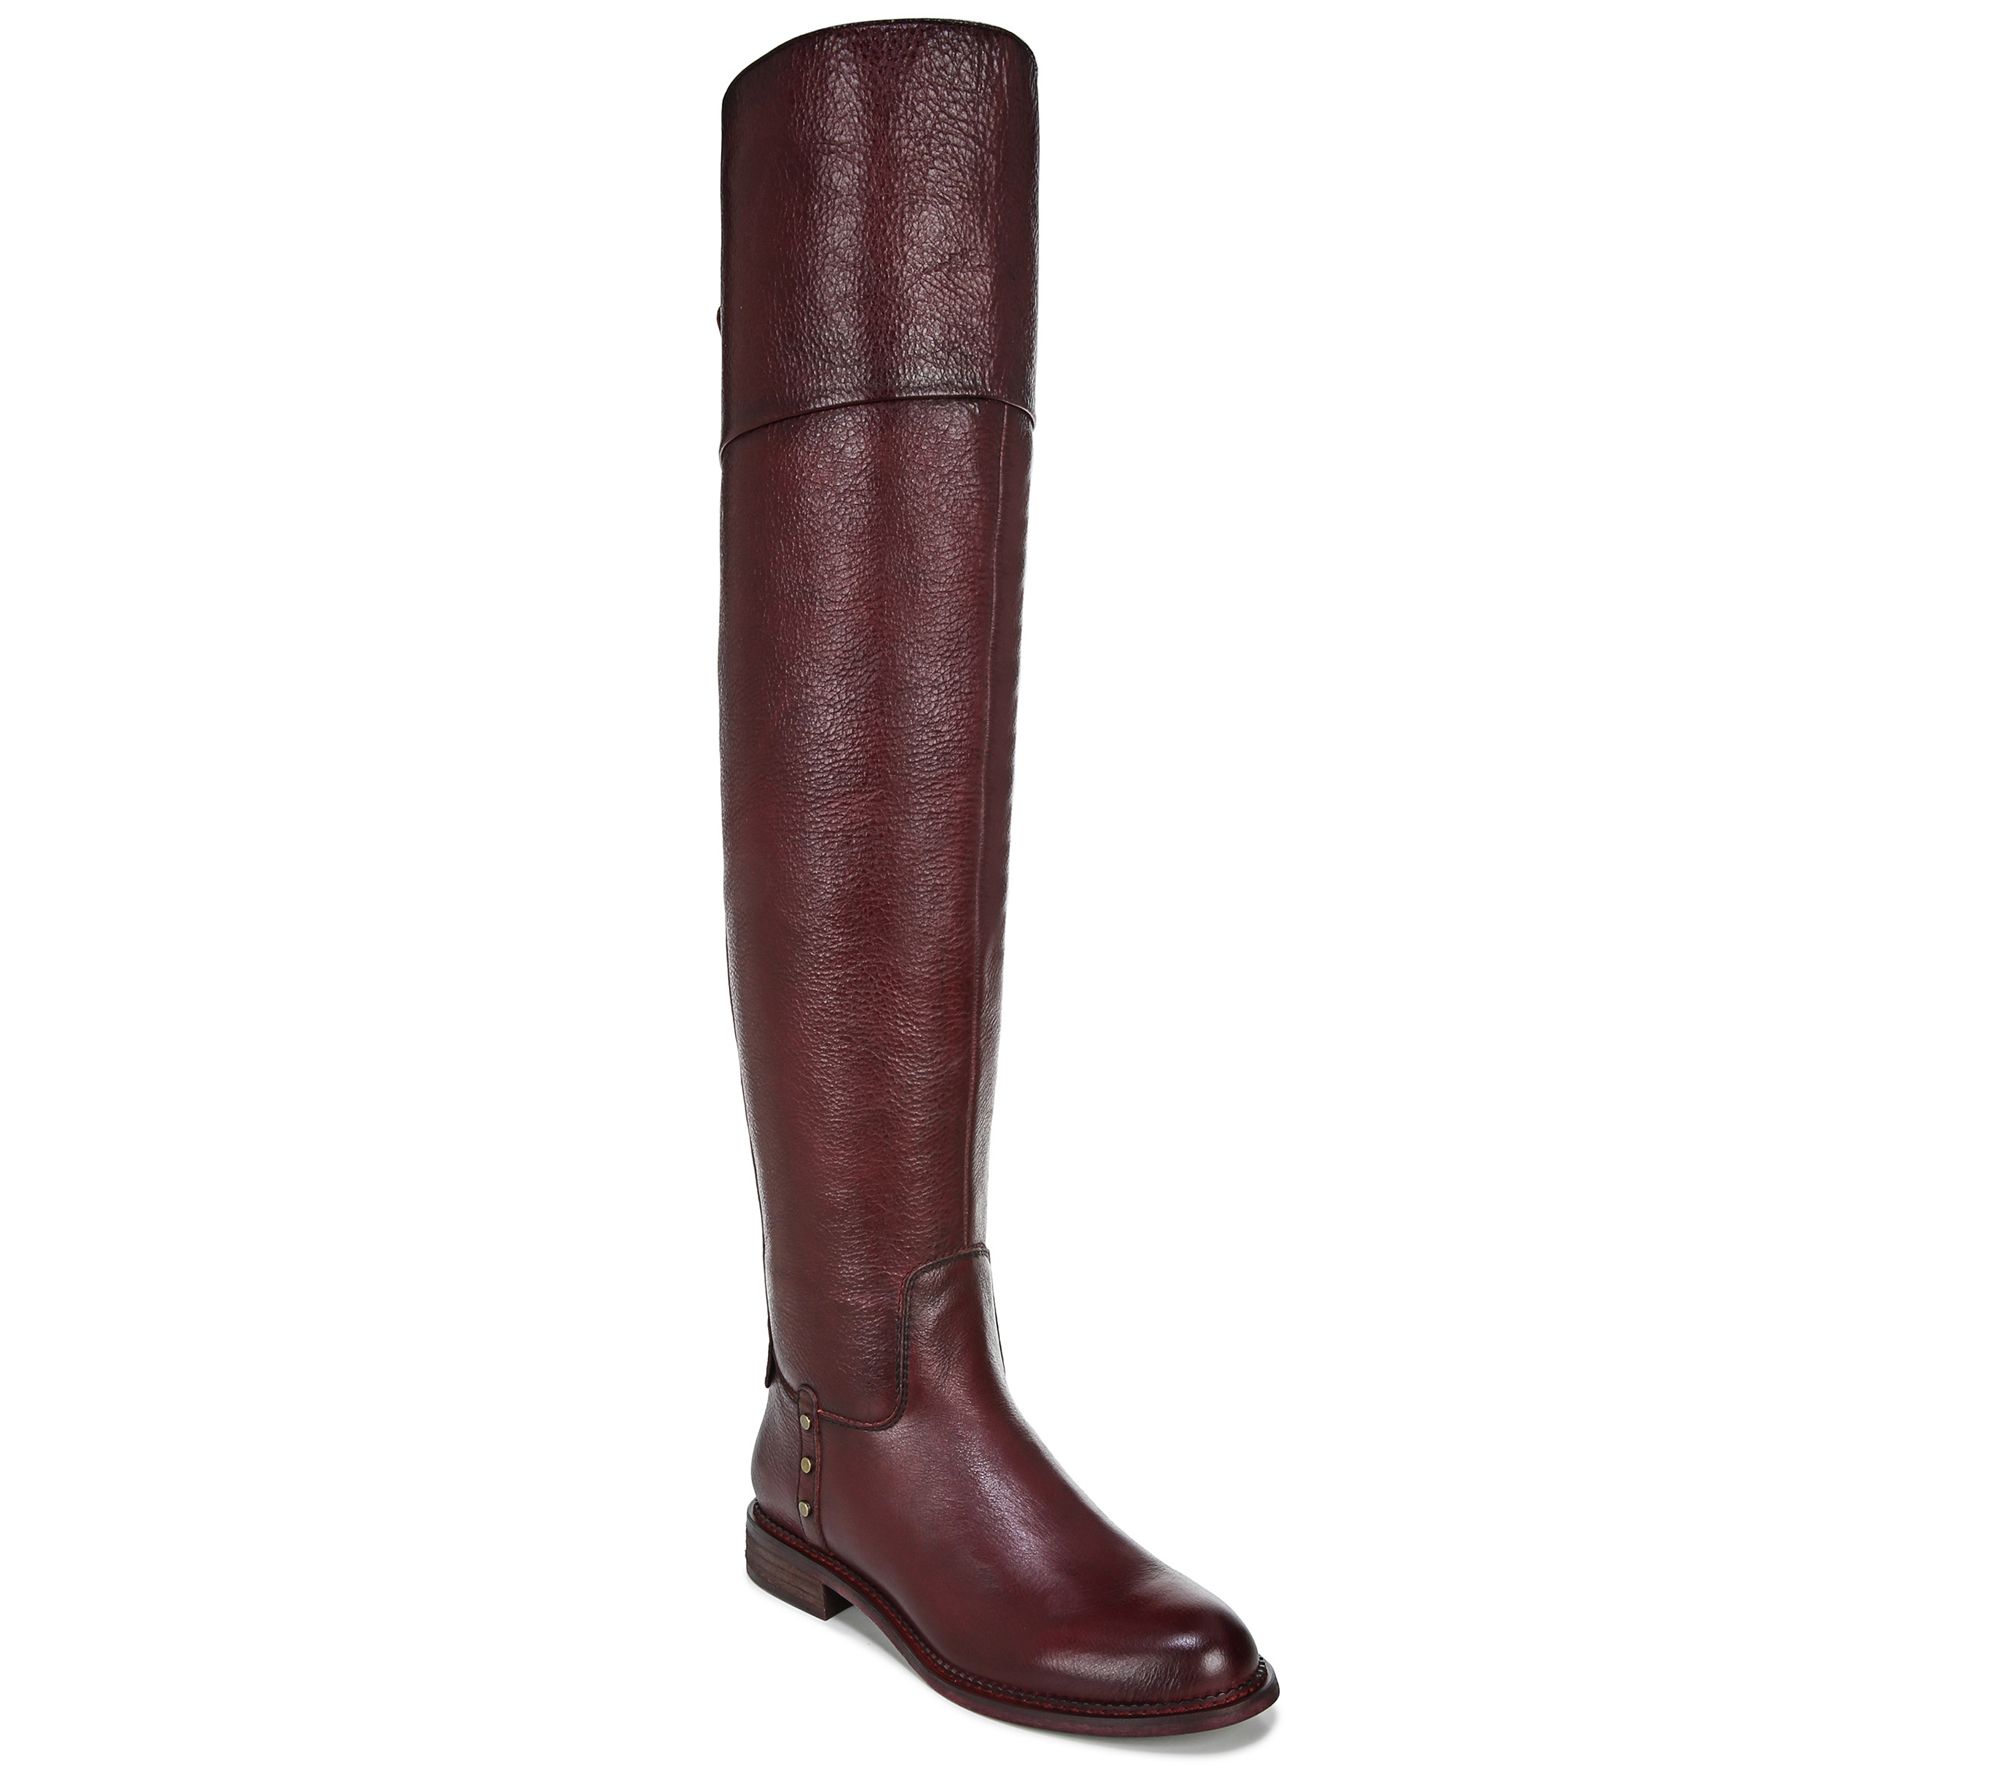 Franco Sarto Leather Over-The-Knee Boots - Haleen - QVC.com